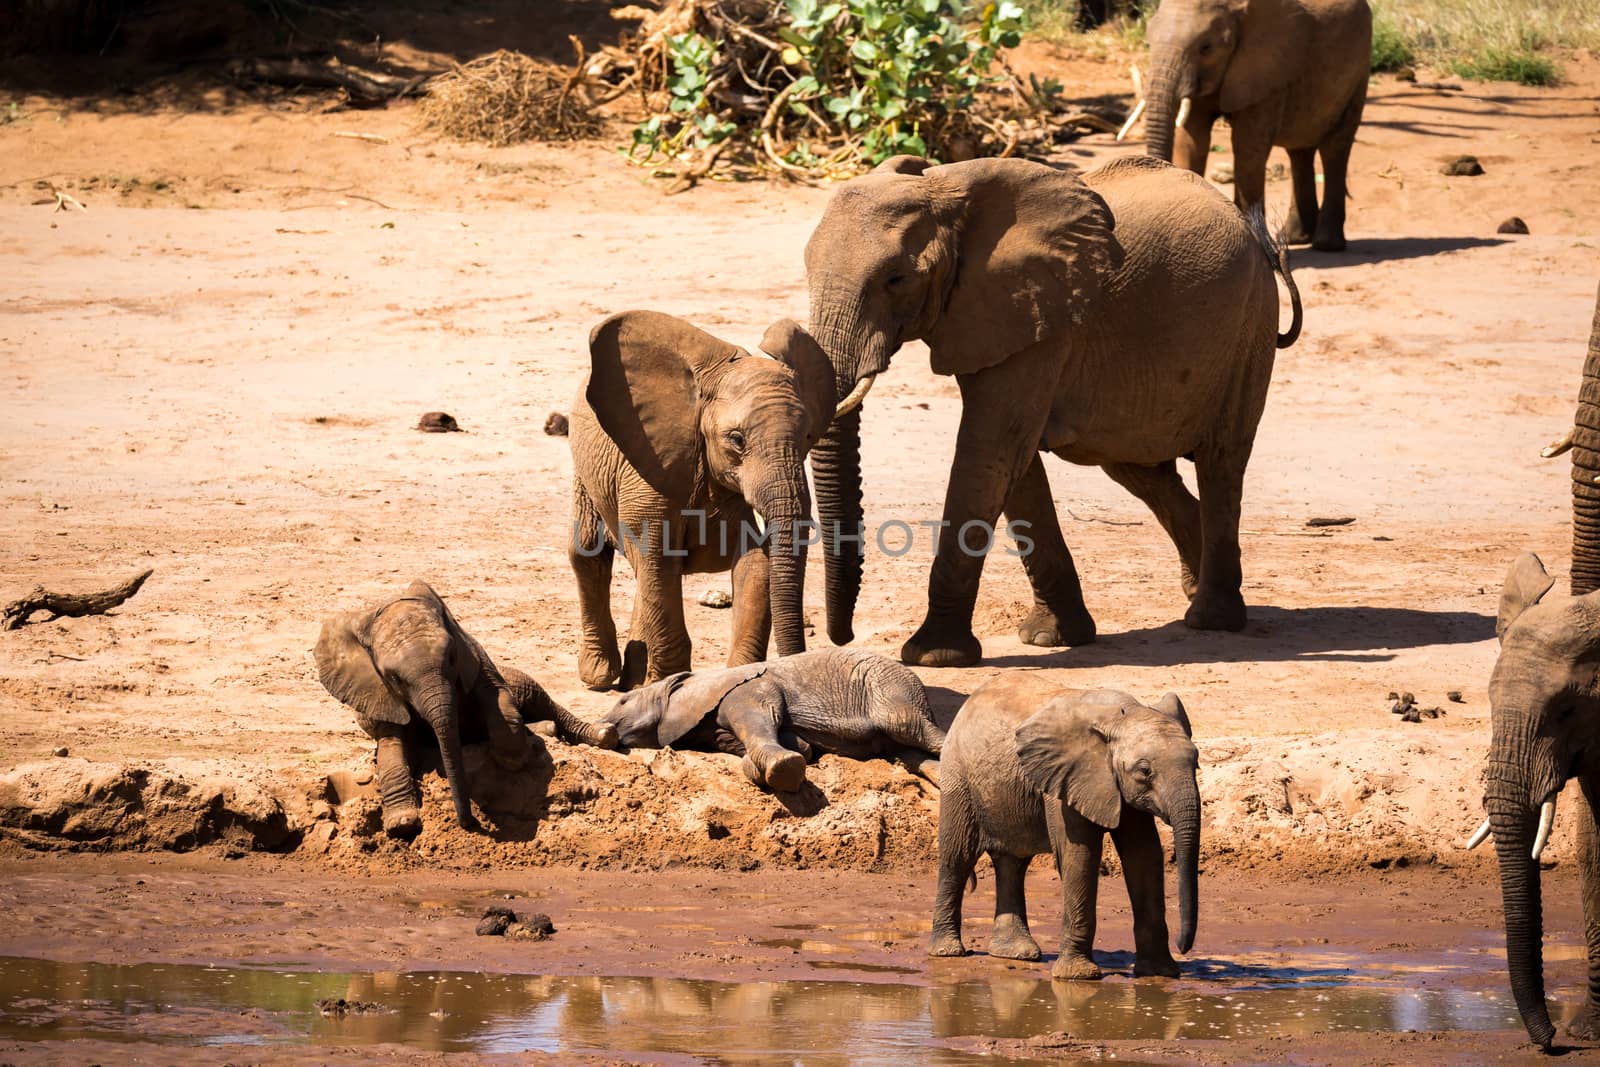 One large elephant family is on the bank of a river